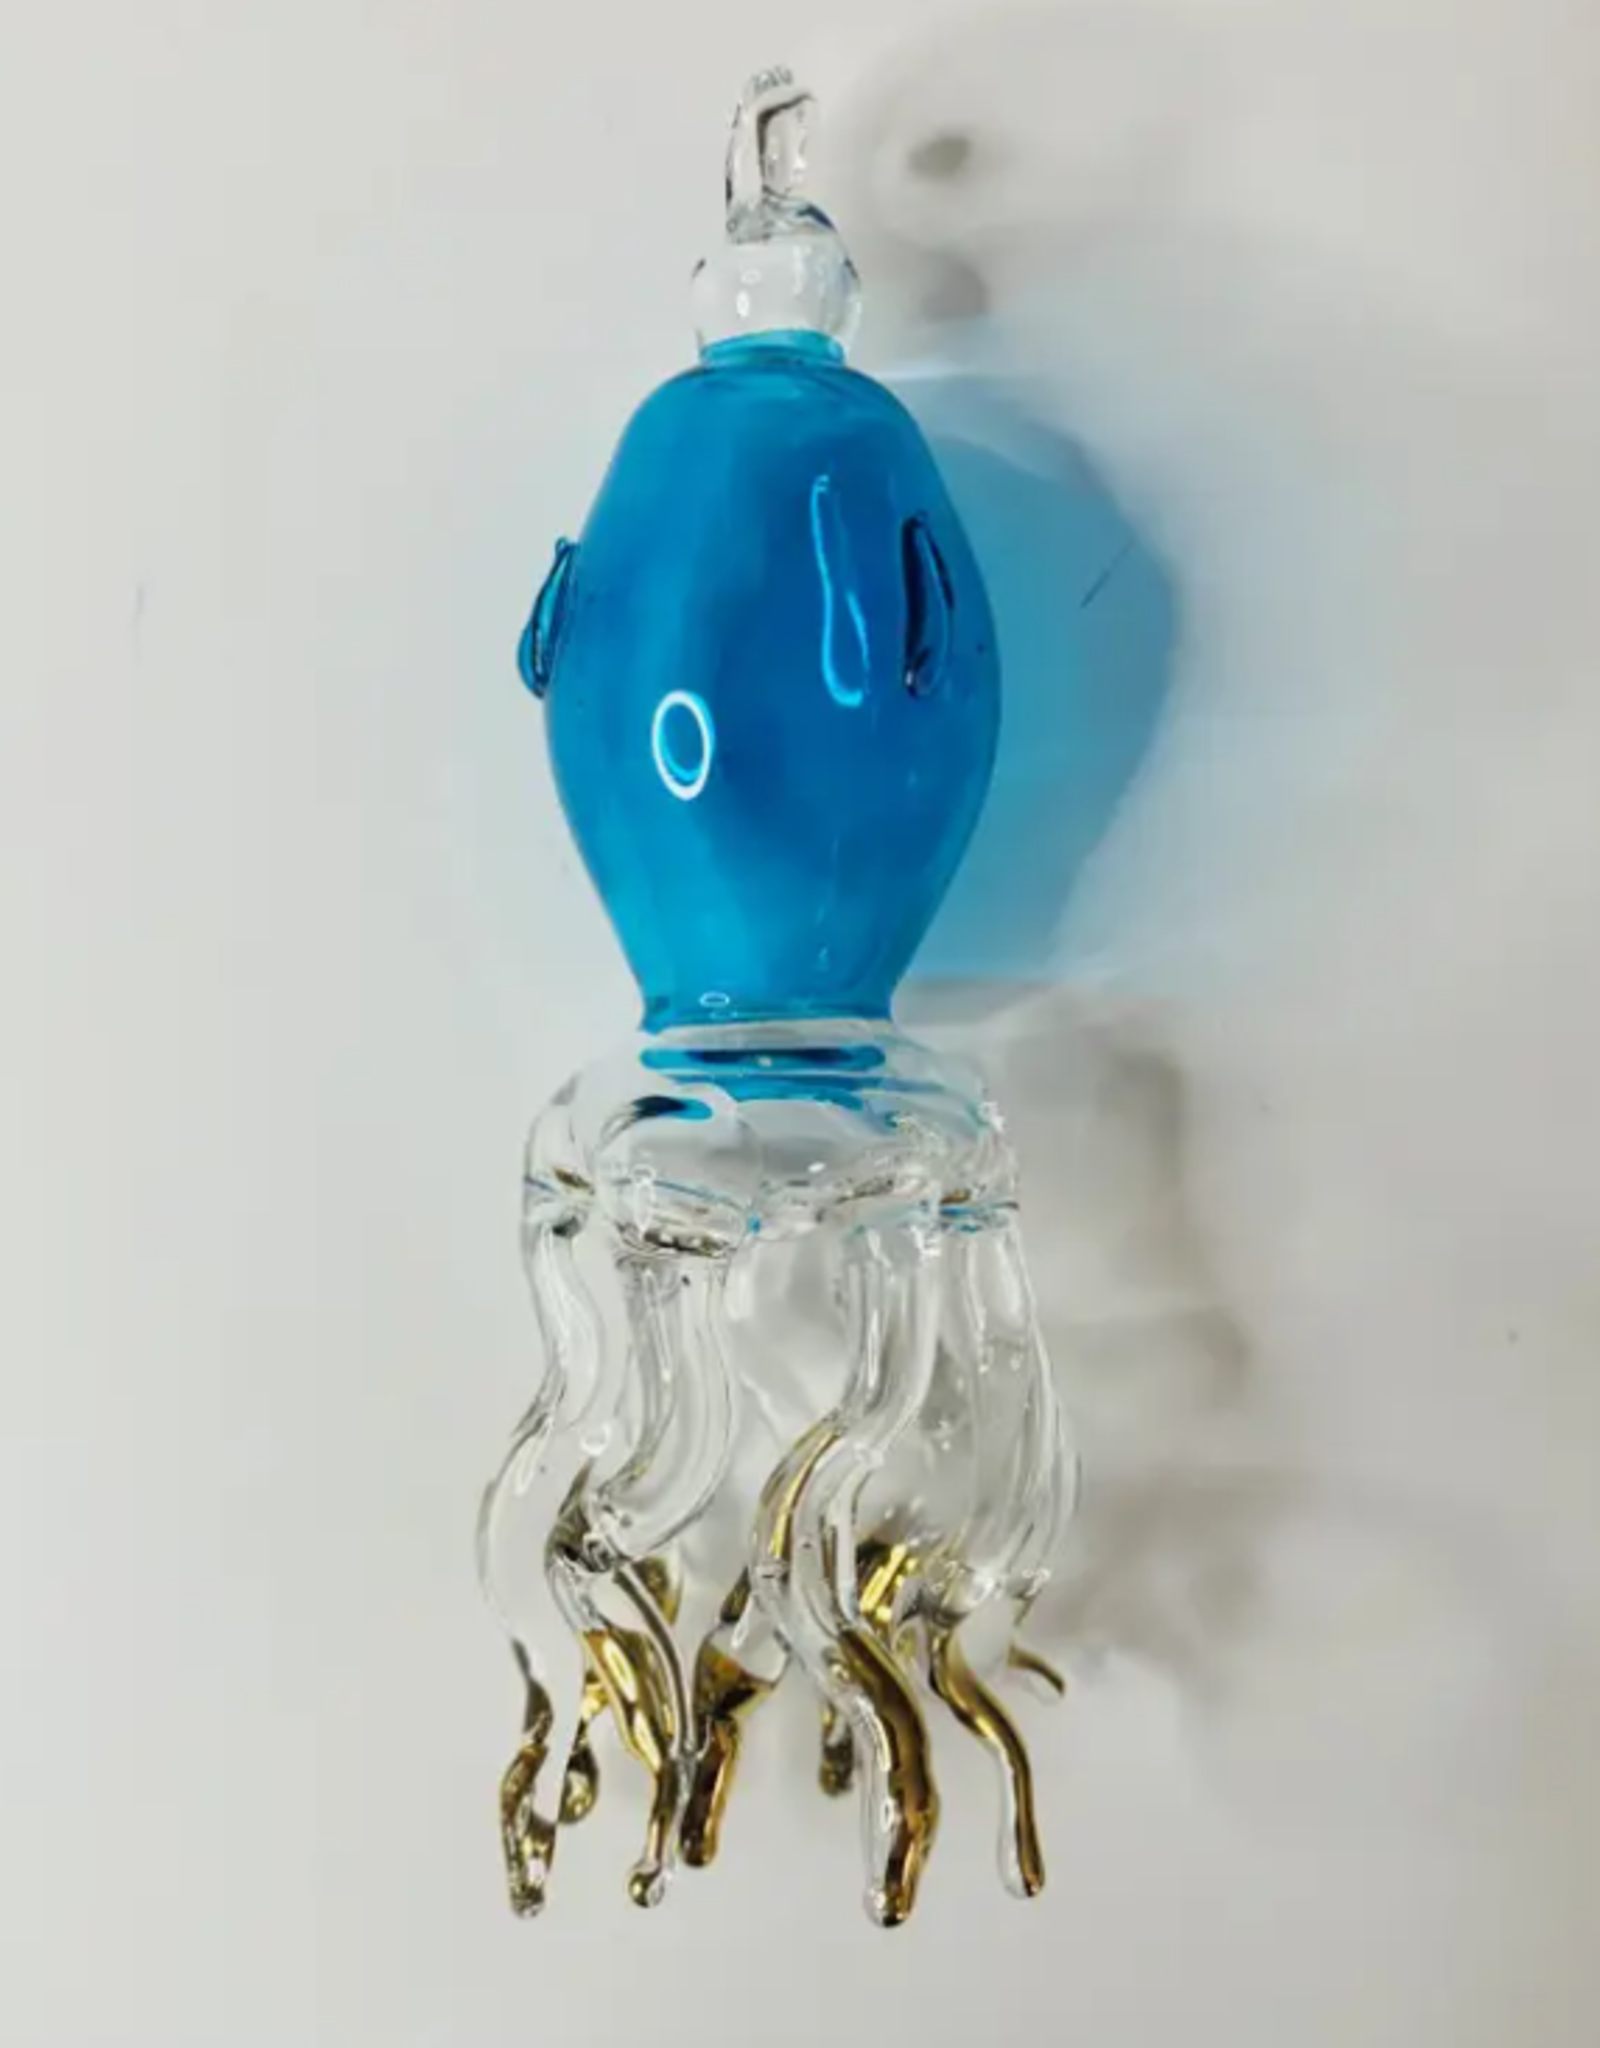 Dandarah Blown Glass Ornament - Turquoise Octopus in Motion